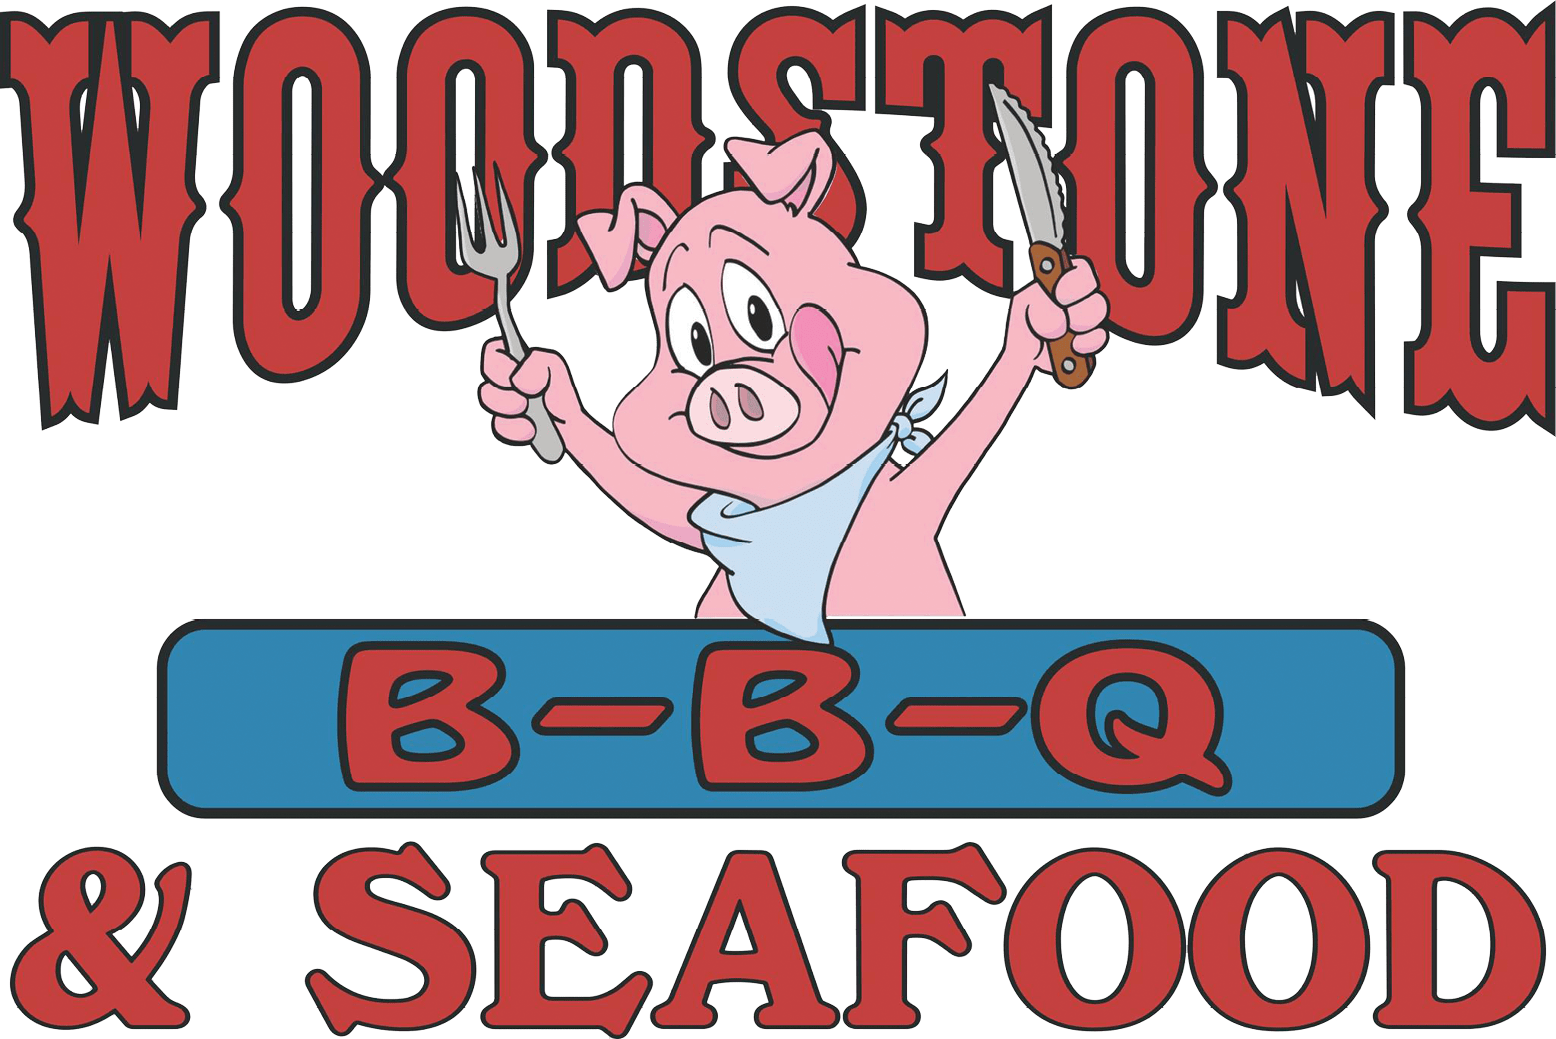 Woodstone Bbq And Seafood Restaurant - Woodstone Bbq And Seafood (1556x1039)